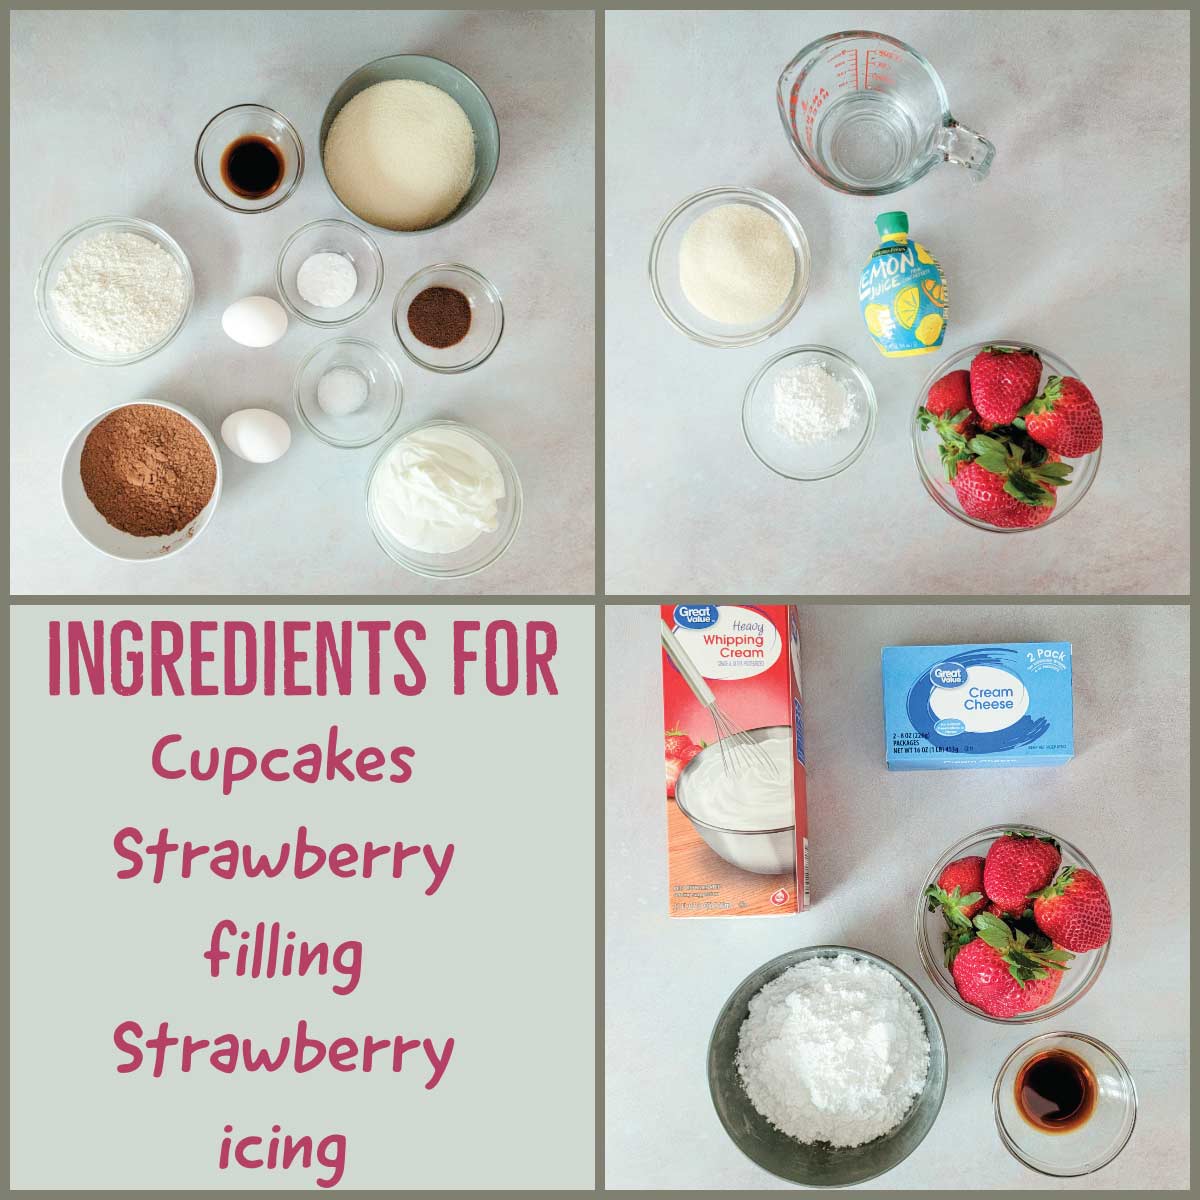 Ingredients prepped for chocolate cupcakes, strawberry filling and strawberry icing.